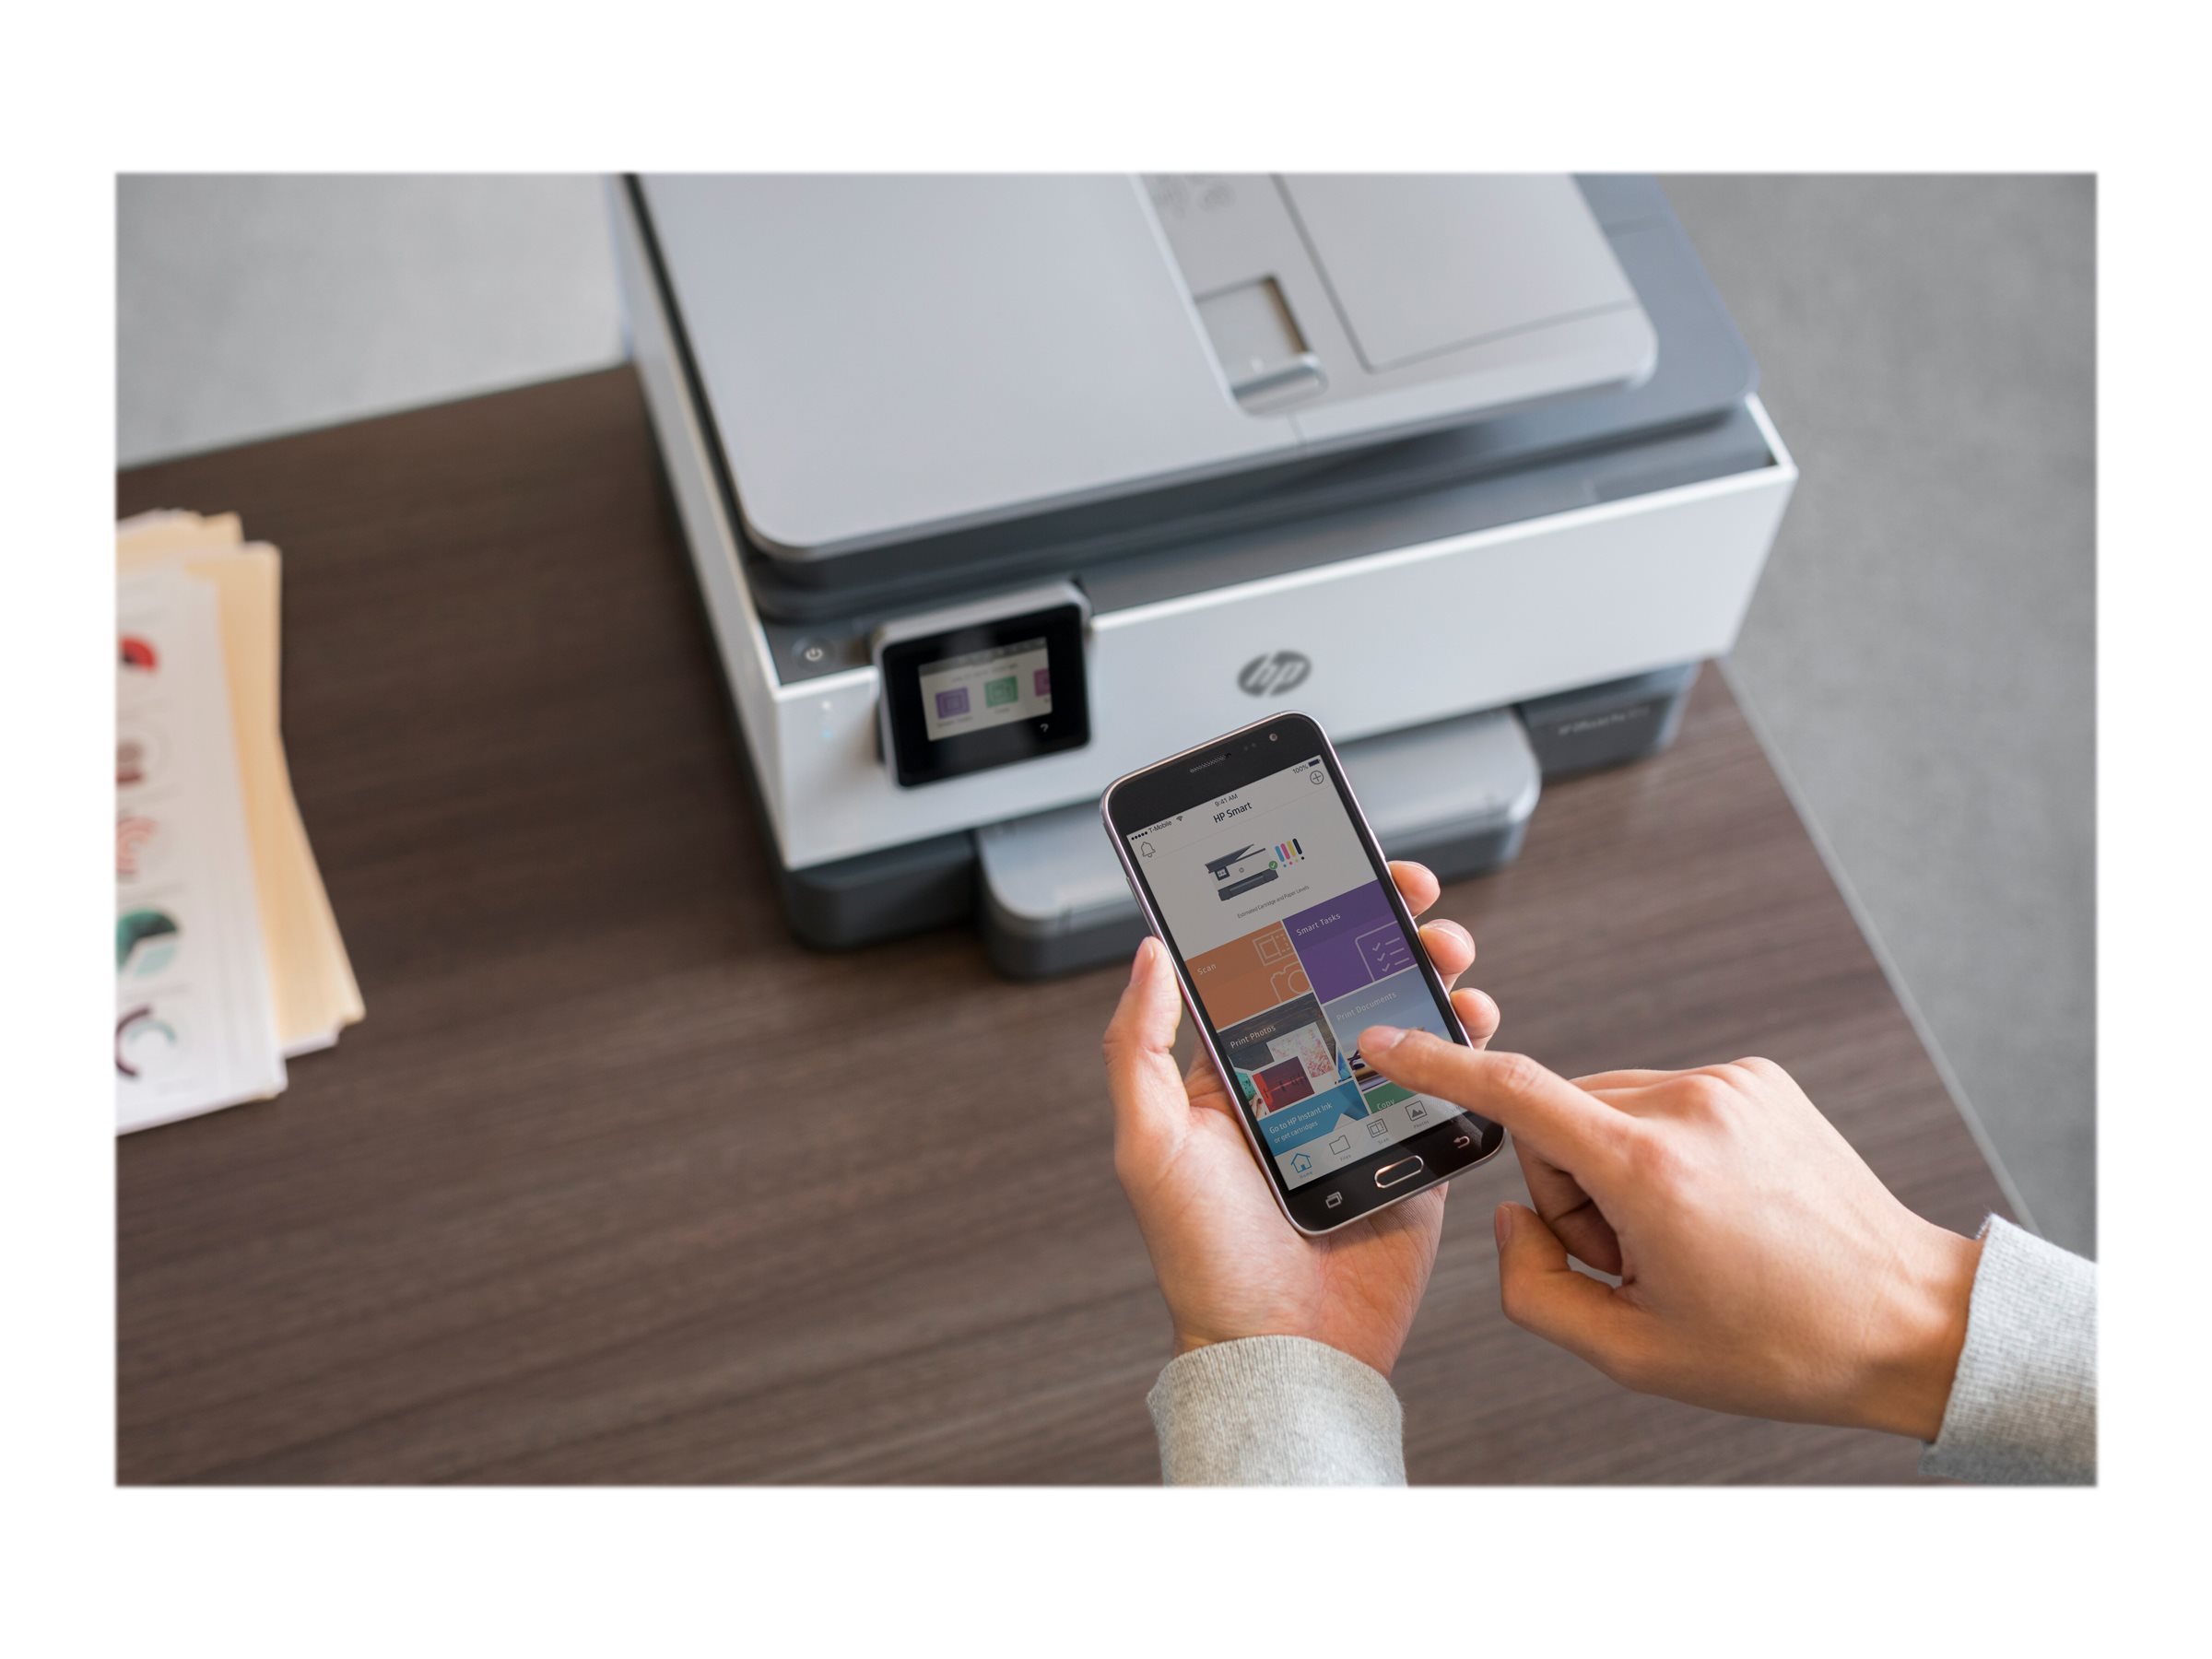 HP Officejet Pro 9010 All-in-One - Imprimante multifonctions